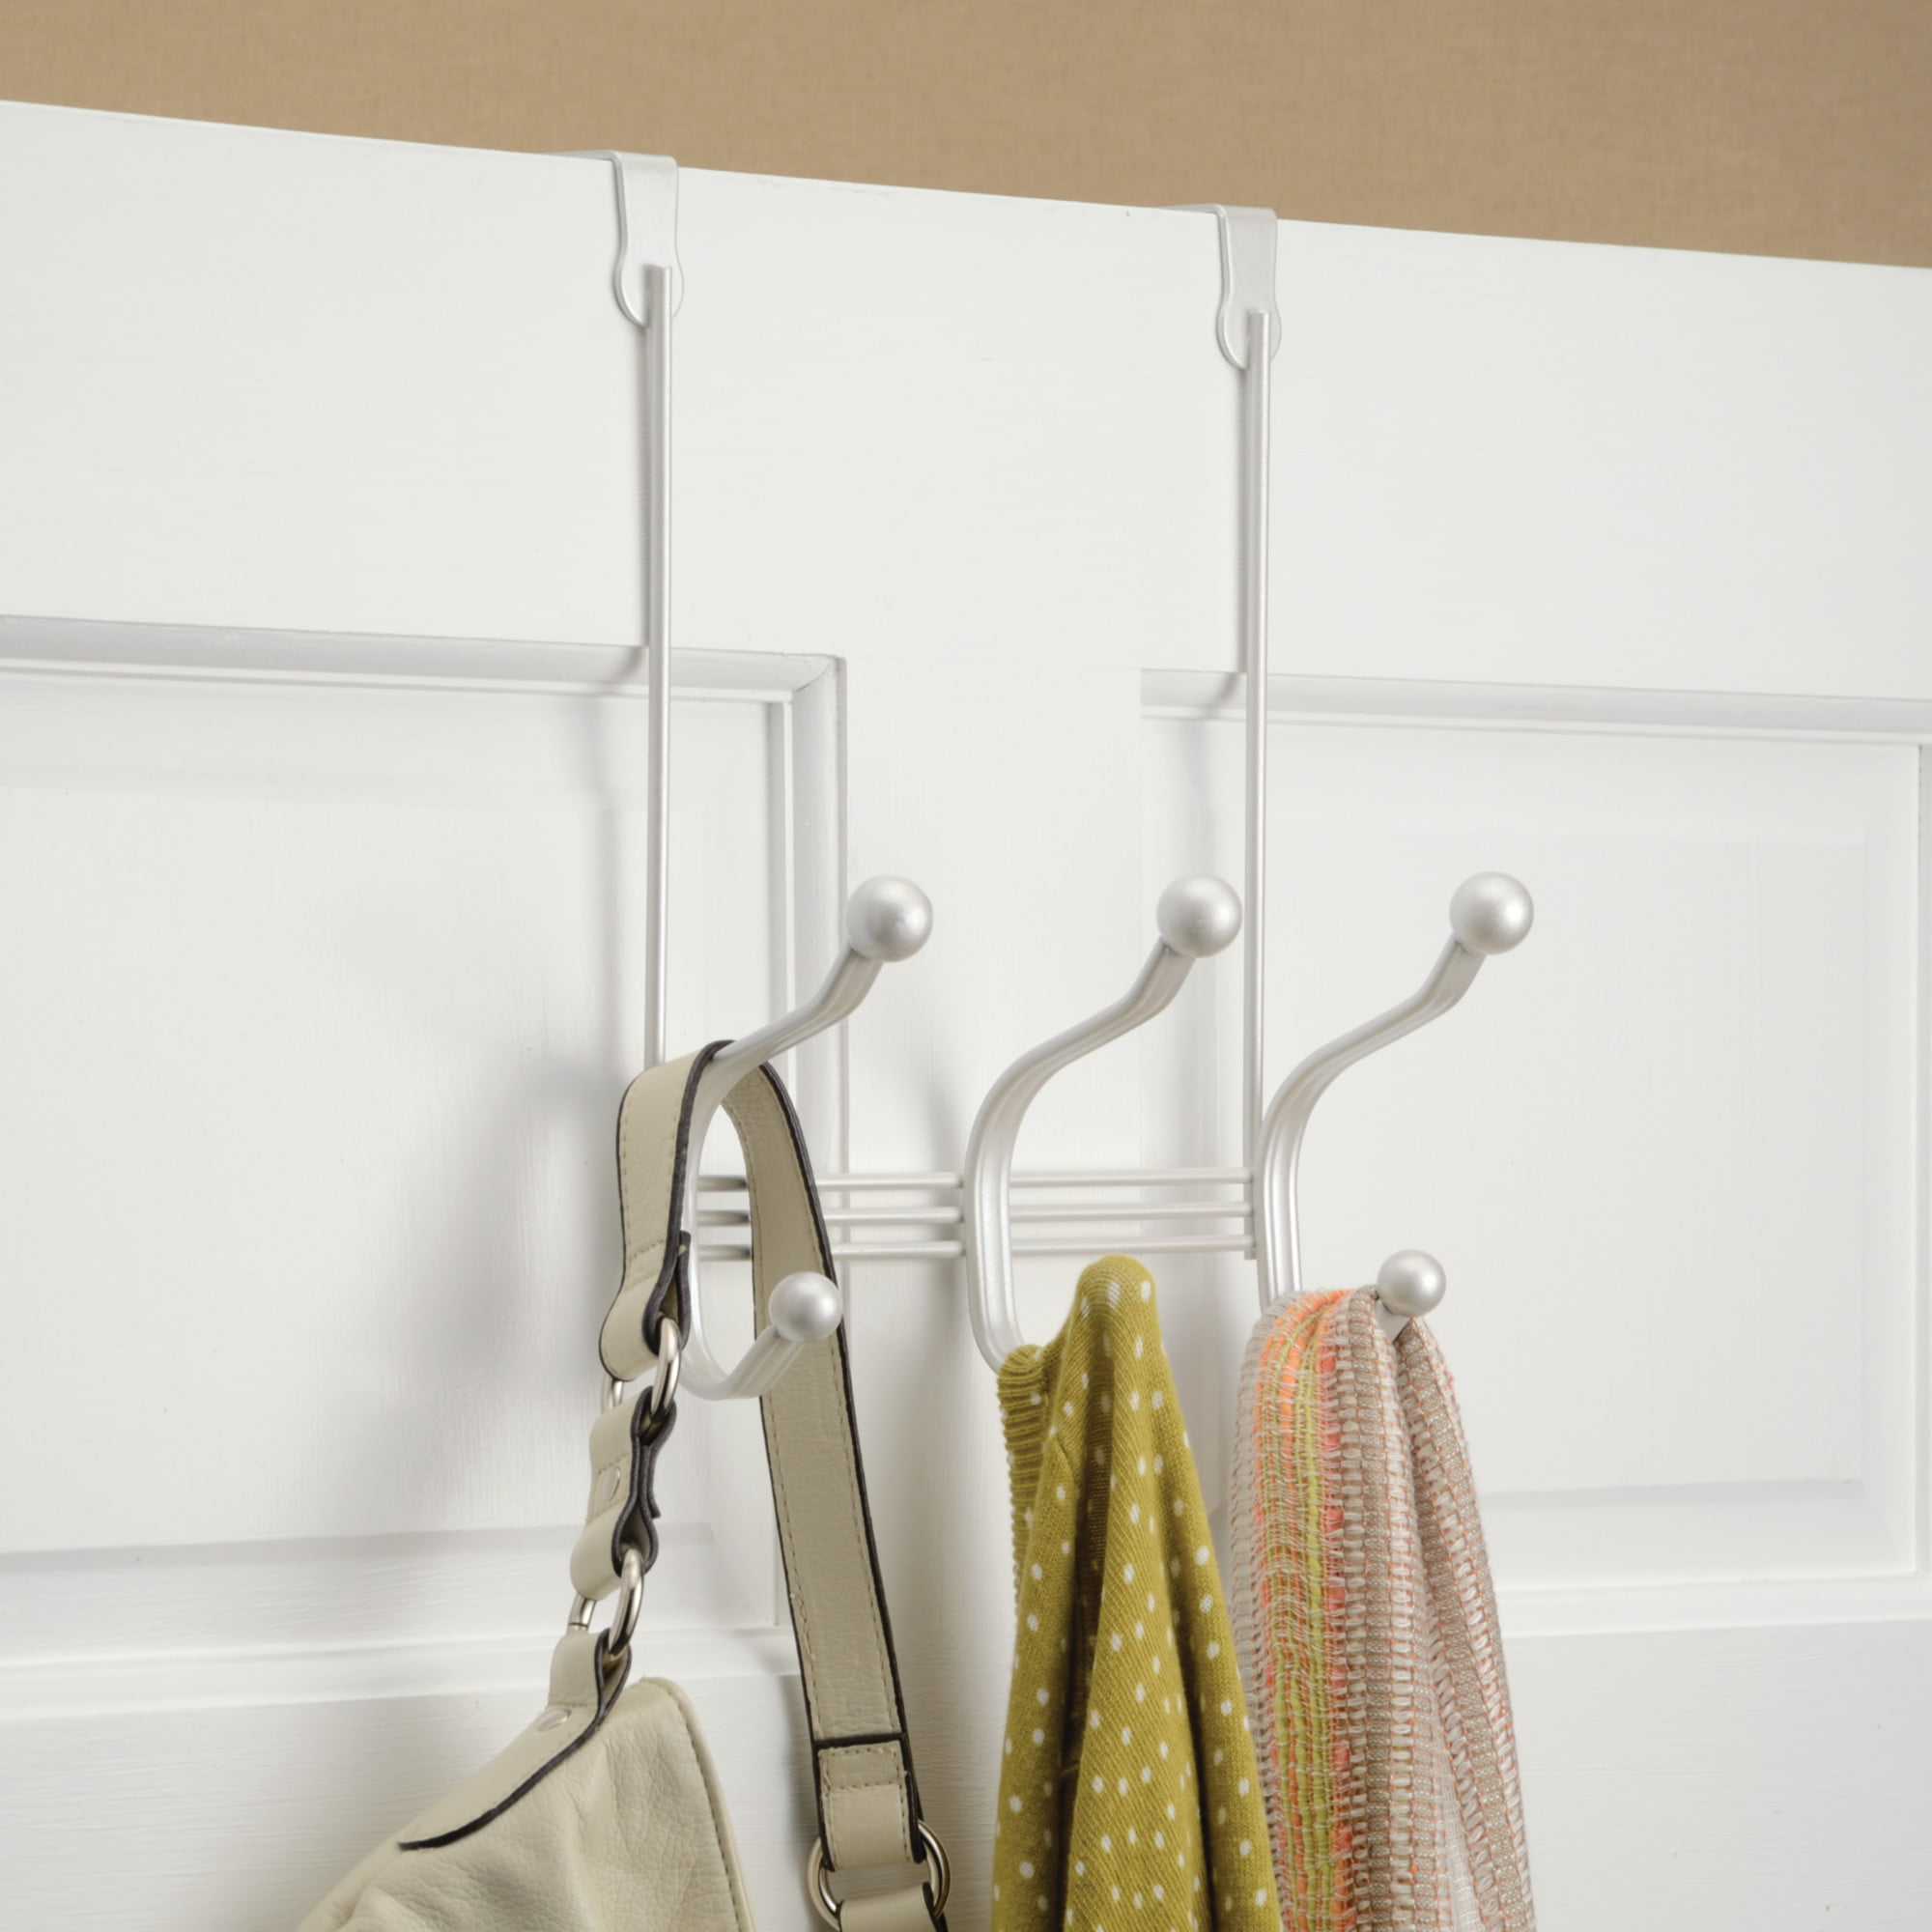 Towels Purses Bedroom and Bathroom Pearl White 18.25 x 5 x 10.75 Hats 6-Hook Rack for Coats Jackets iDesign Classico Metal Over the Door Organizer Robes Closet 